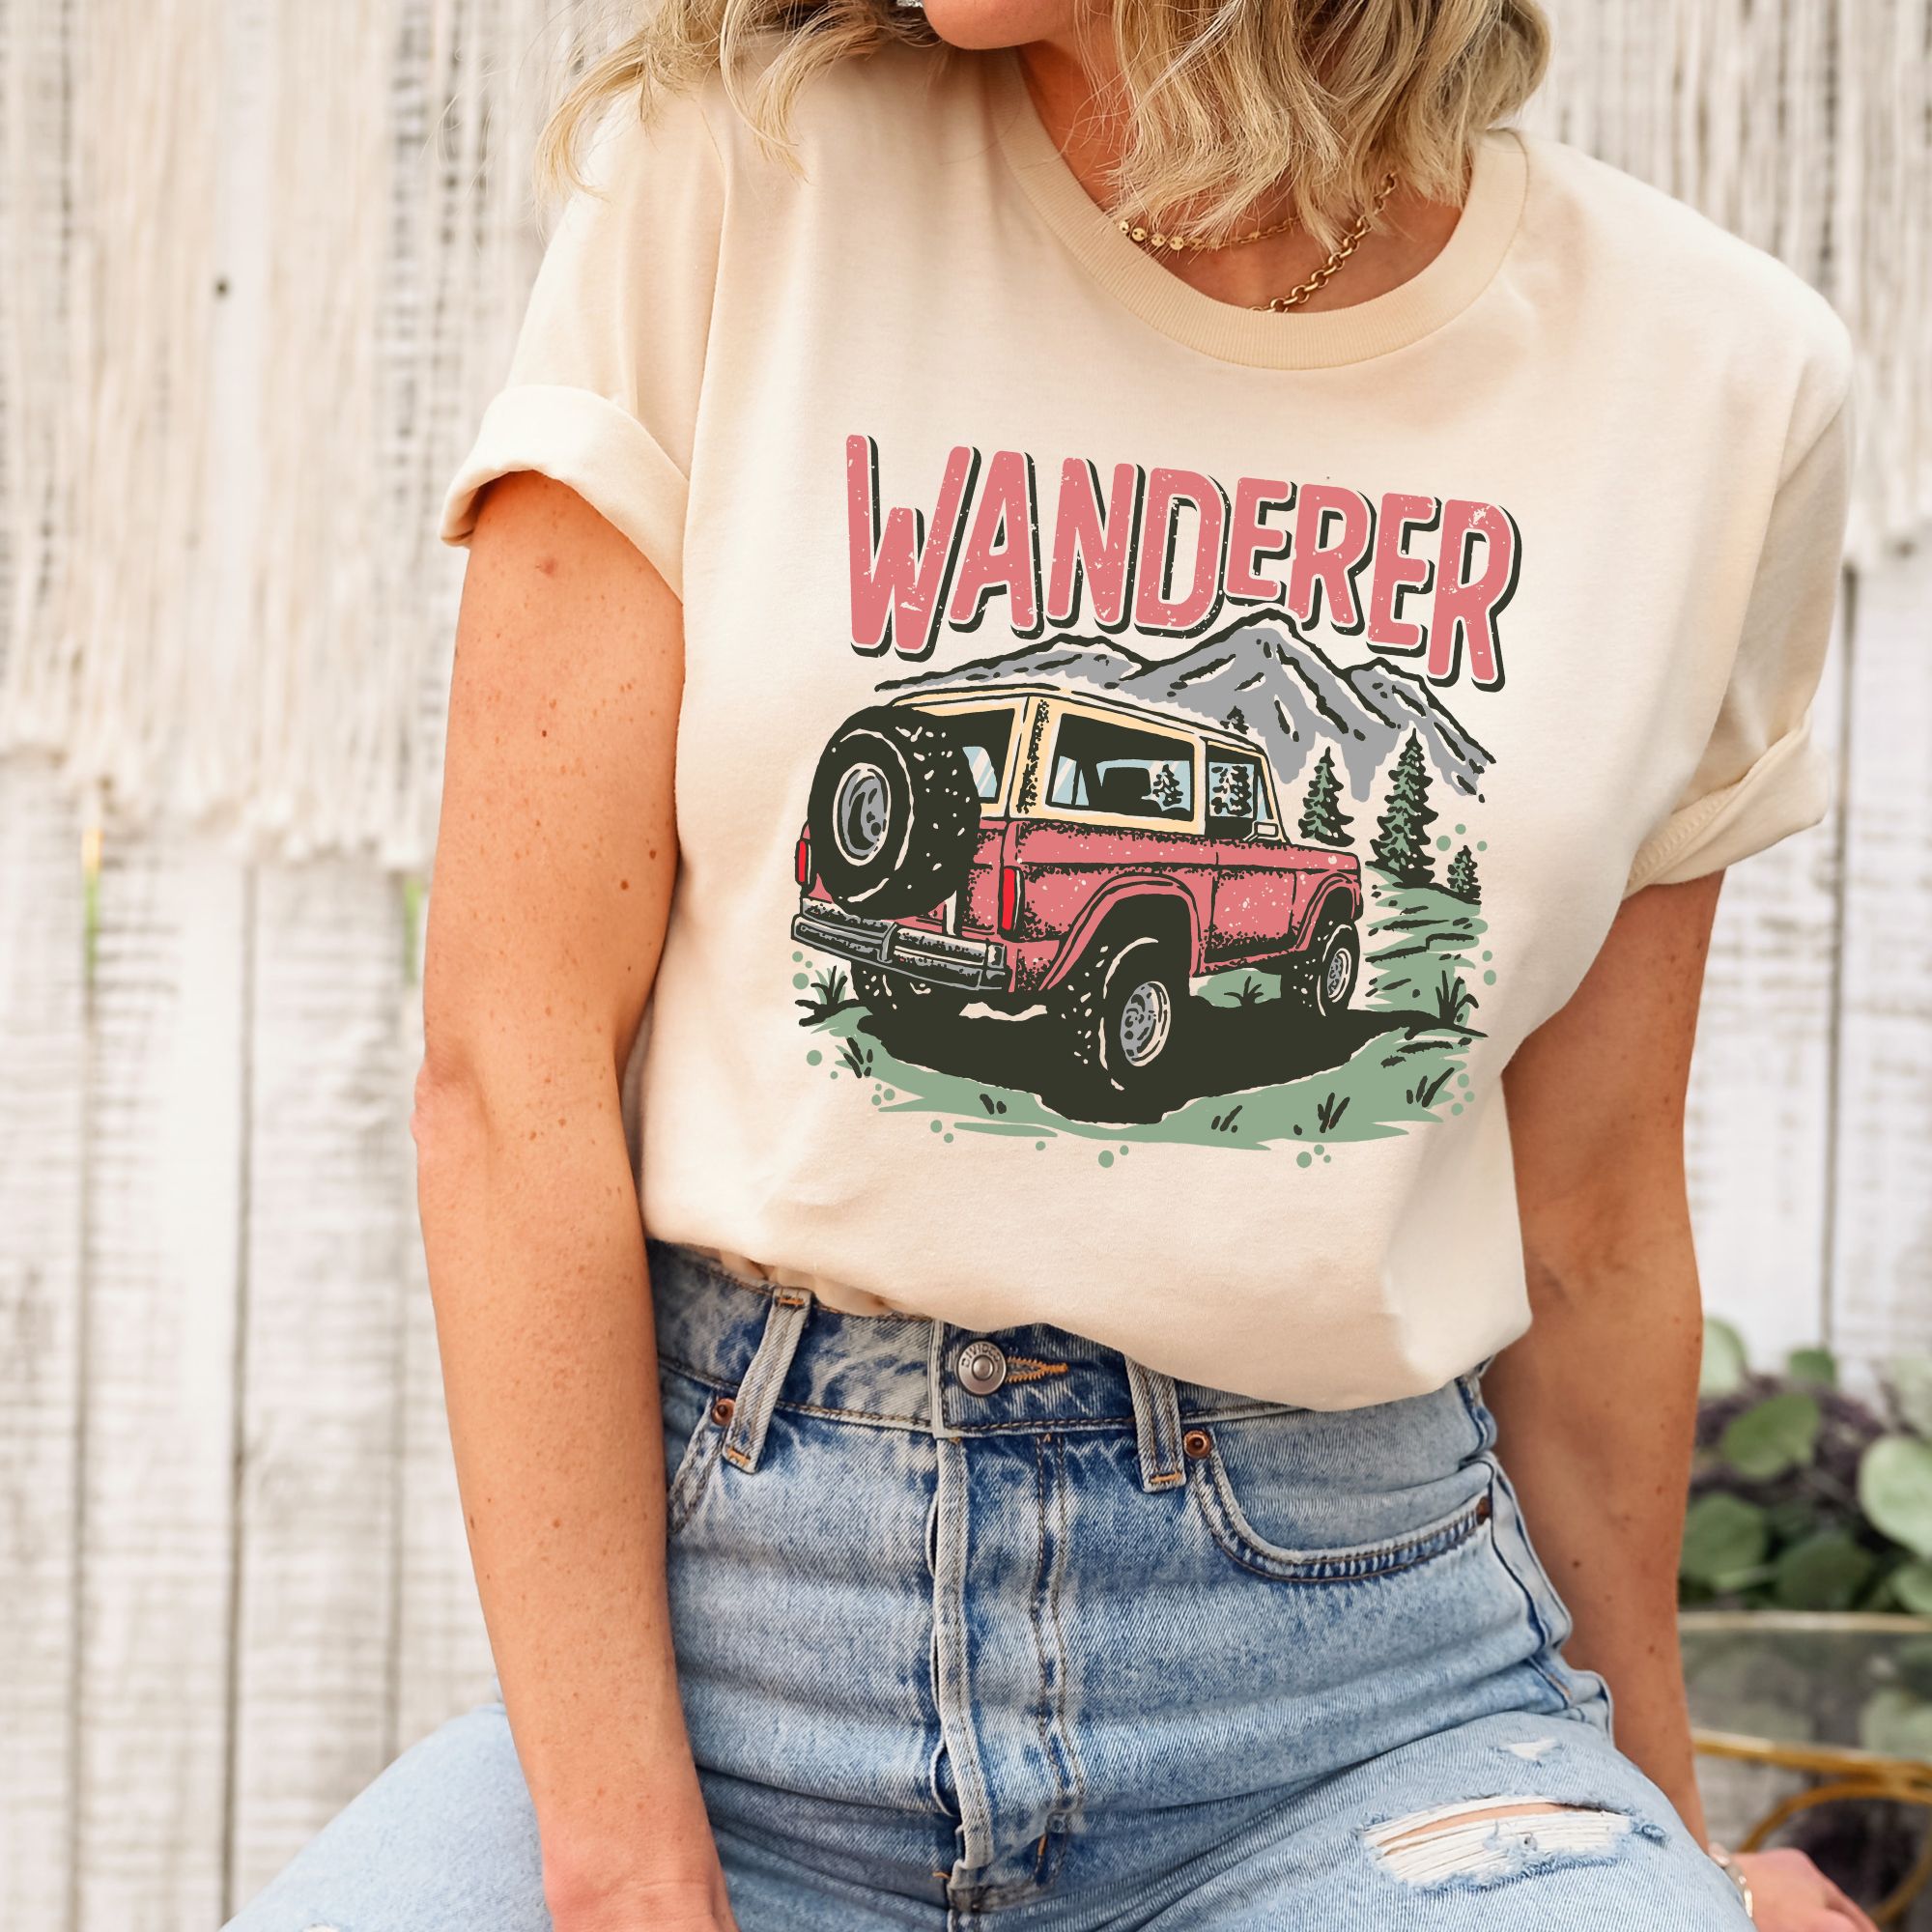 Wanderer Nature Lover Graphic Tee *UNISEX FIT*-Graphic Tees-208 Tees Wholesale, Idaho